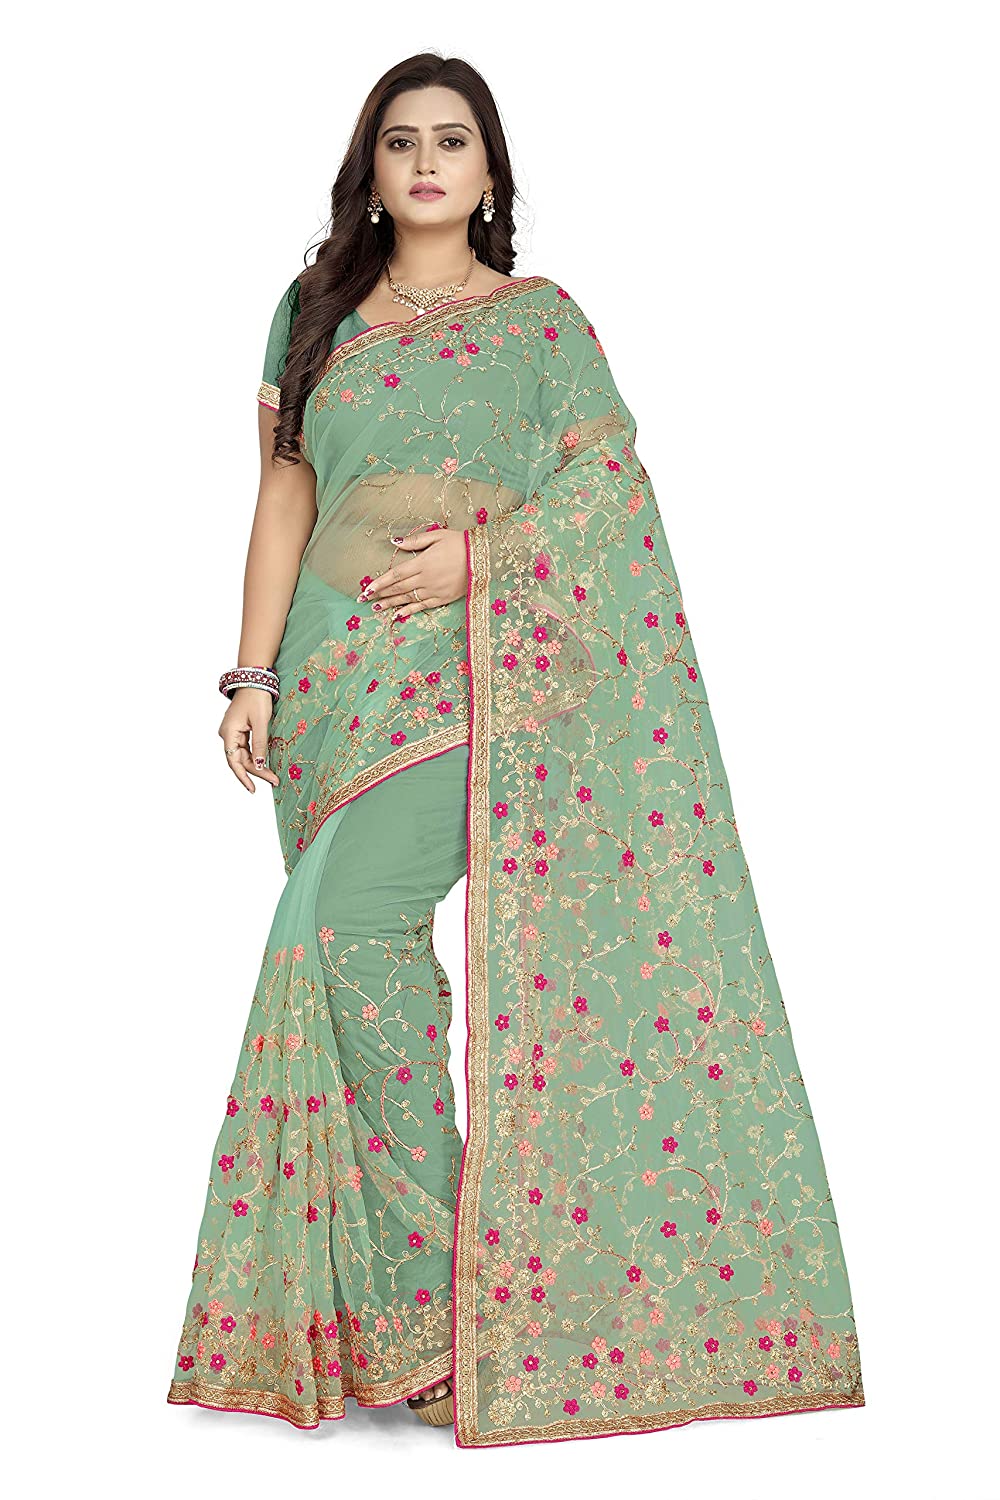 Choose Any Of The Fancy Sarees